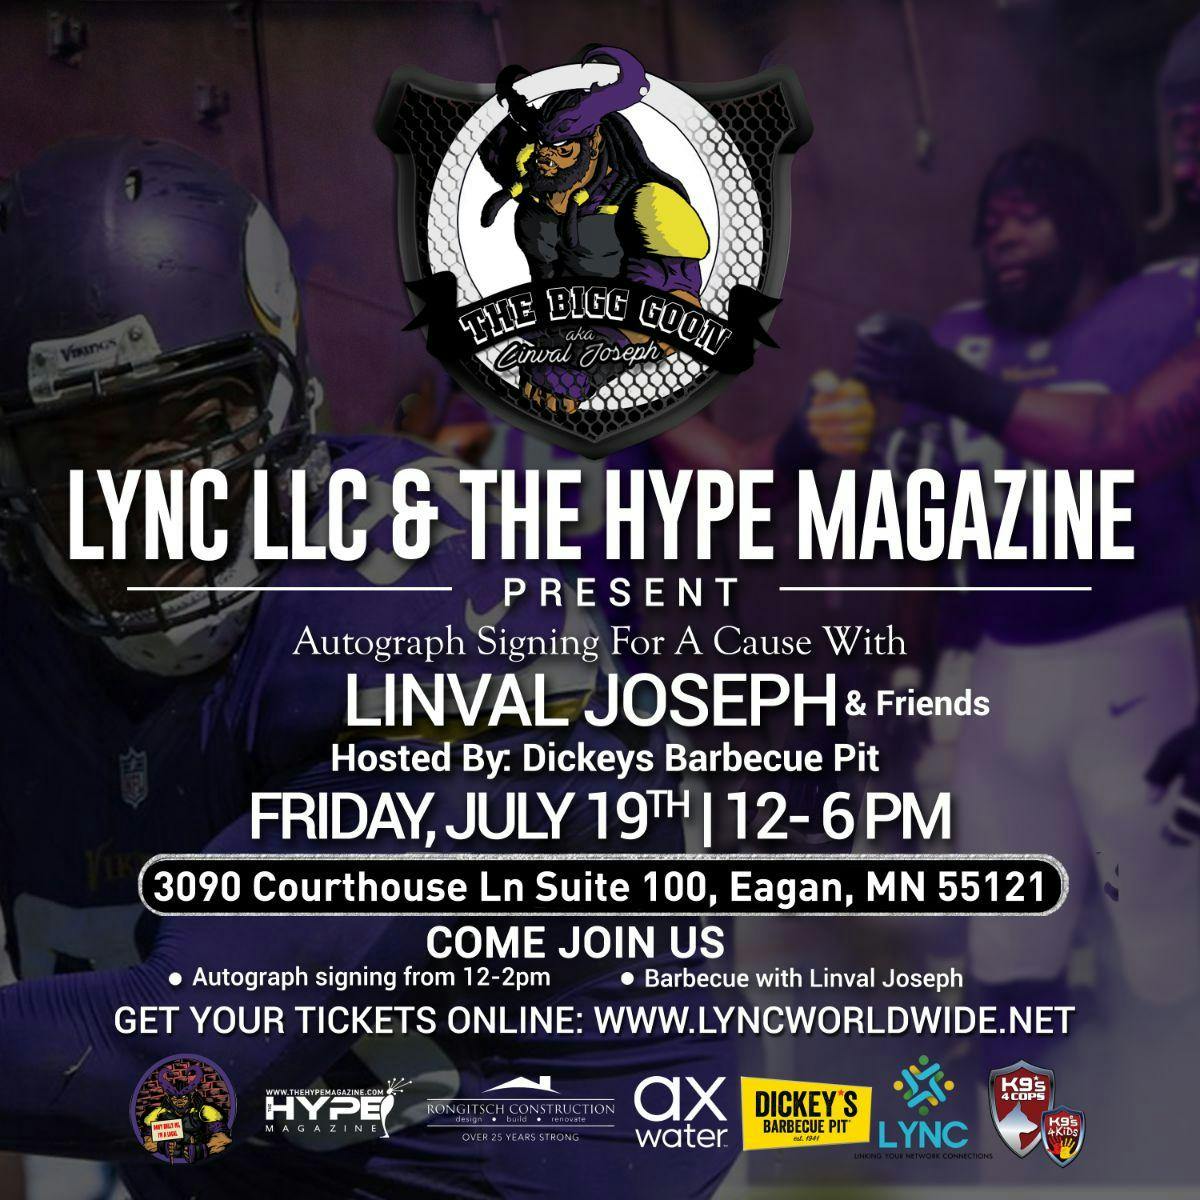 LYNC LLC & HYPE MAGAZINE PRESENTS DICKY'S AUTOGRAPH SIGNING FOR A CAUSE